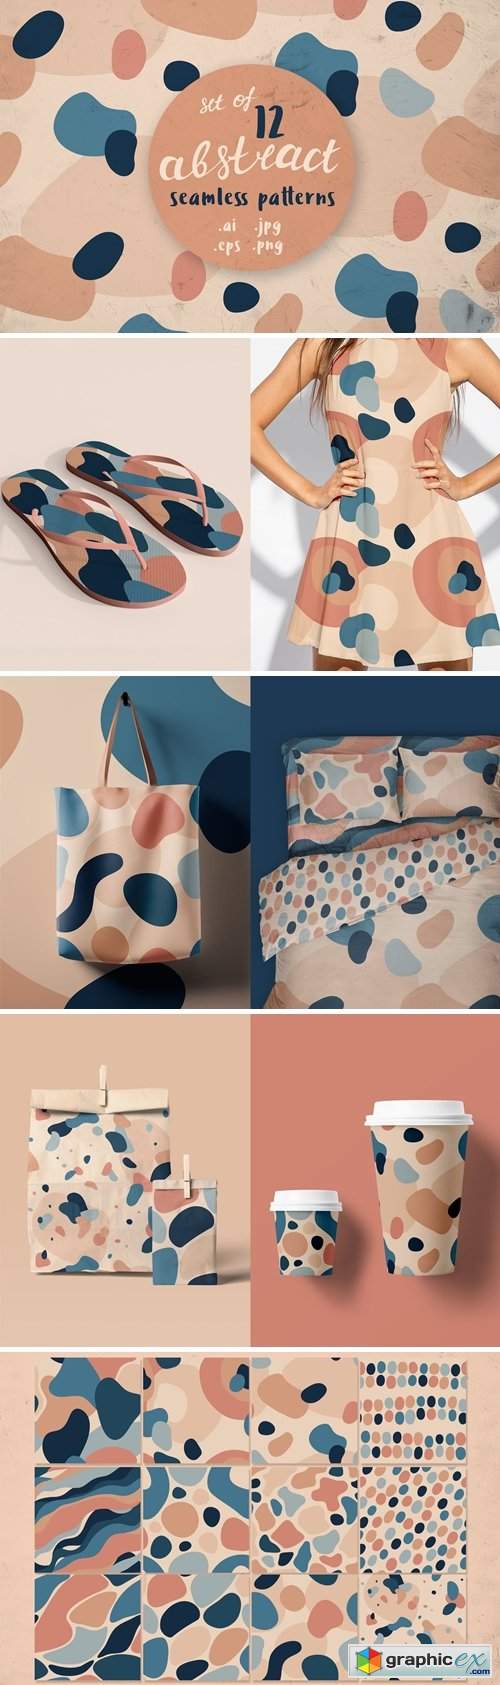 12 abstract seamless patterns 